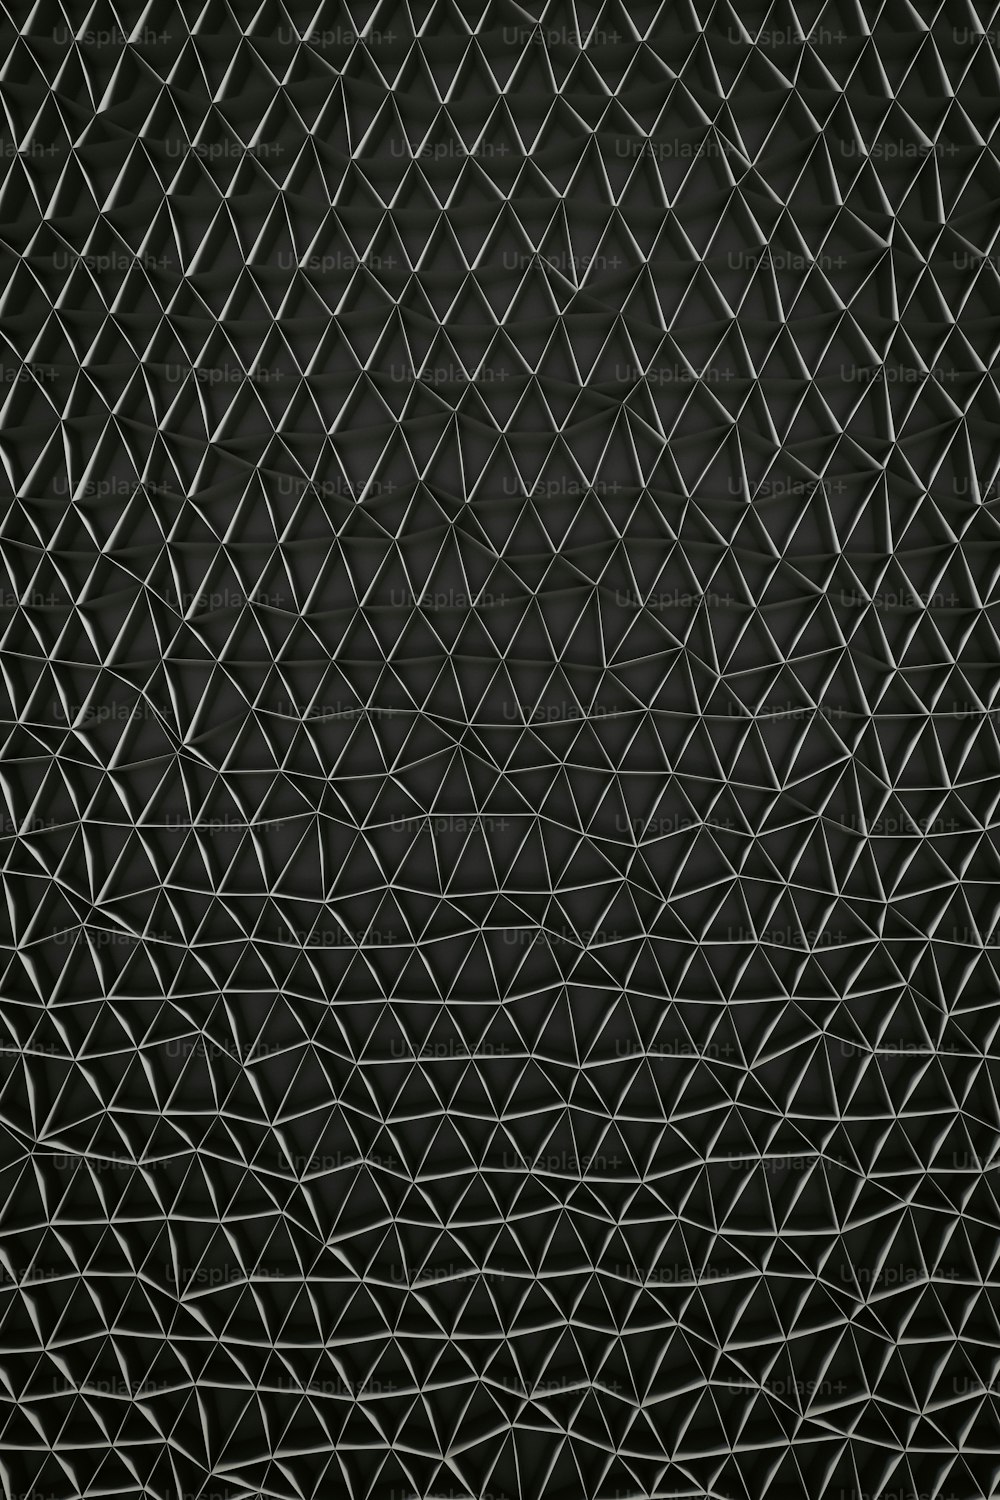 Black Mesh Background on White Background.the Texture of the Black